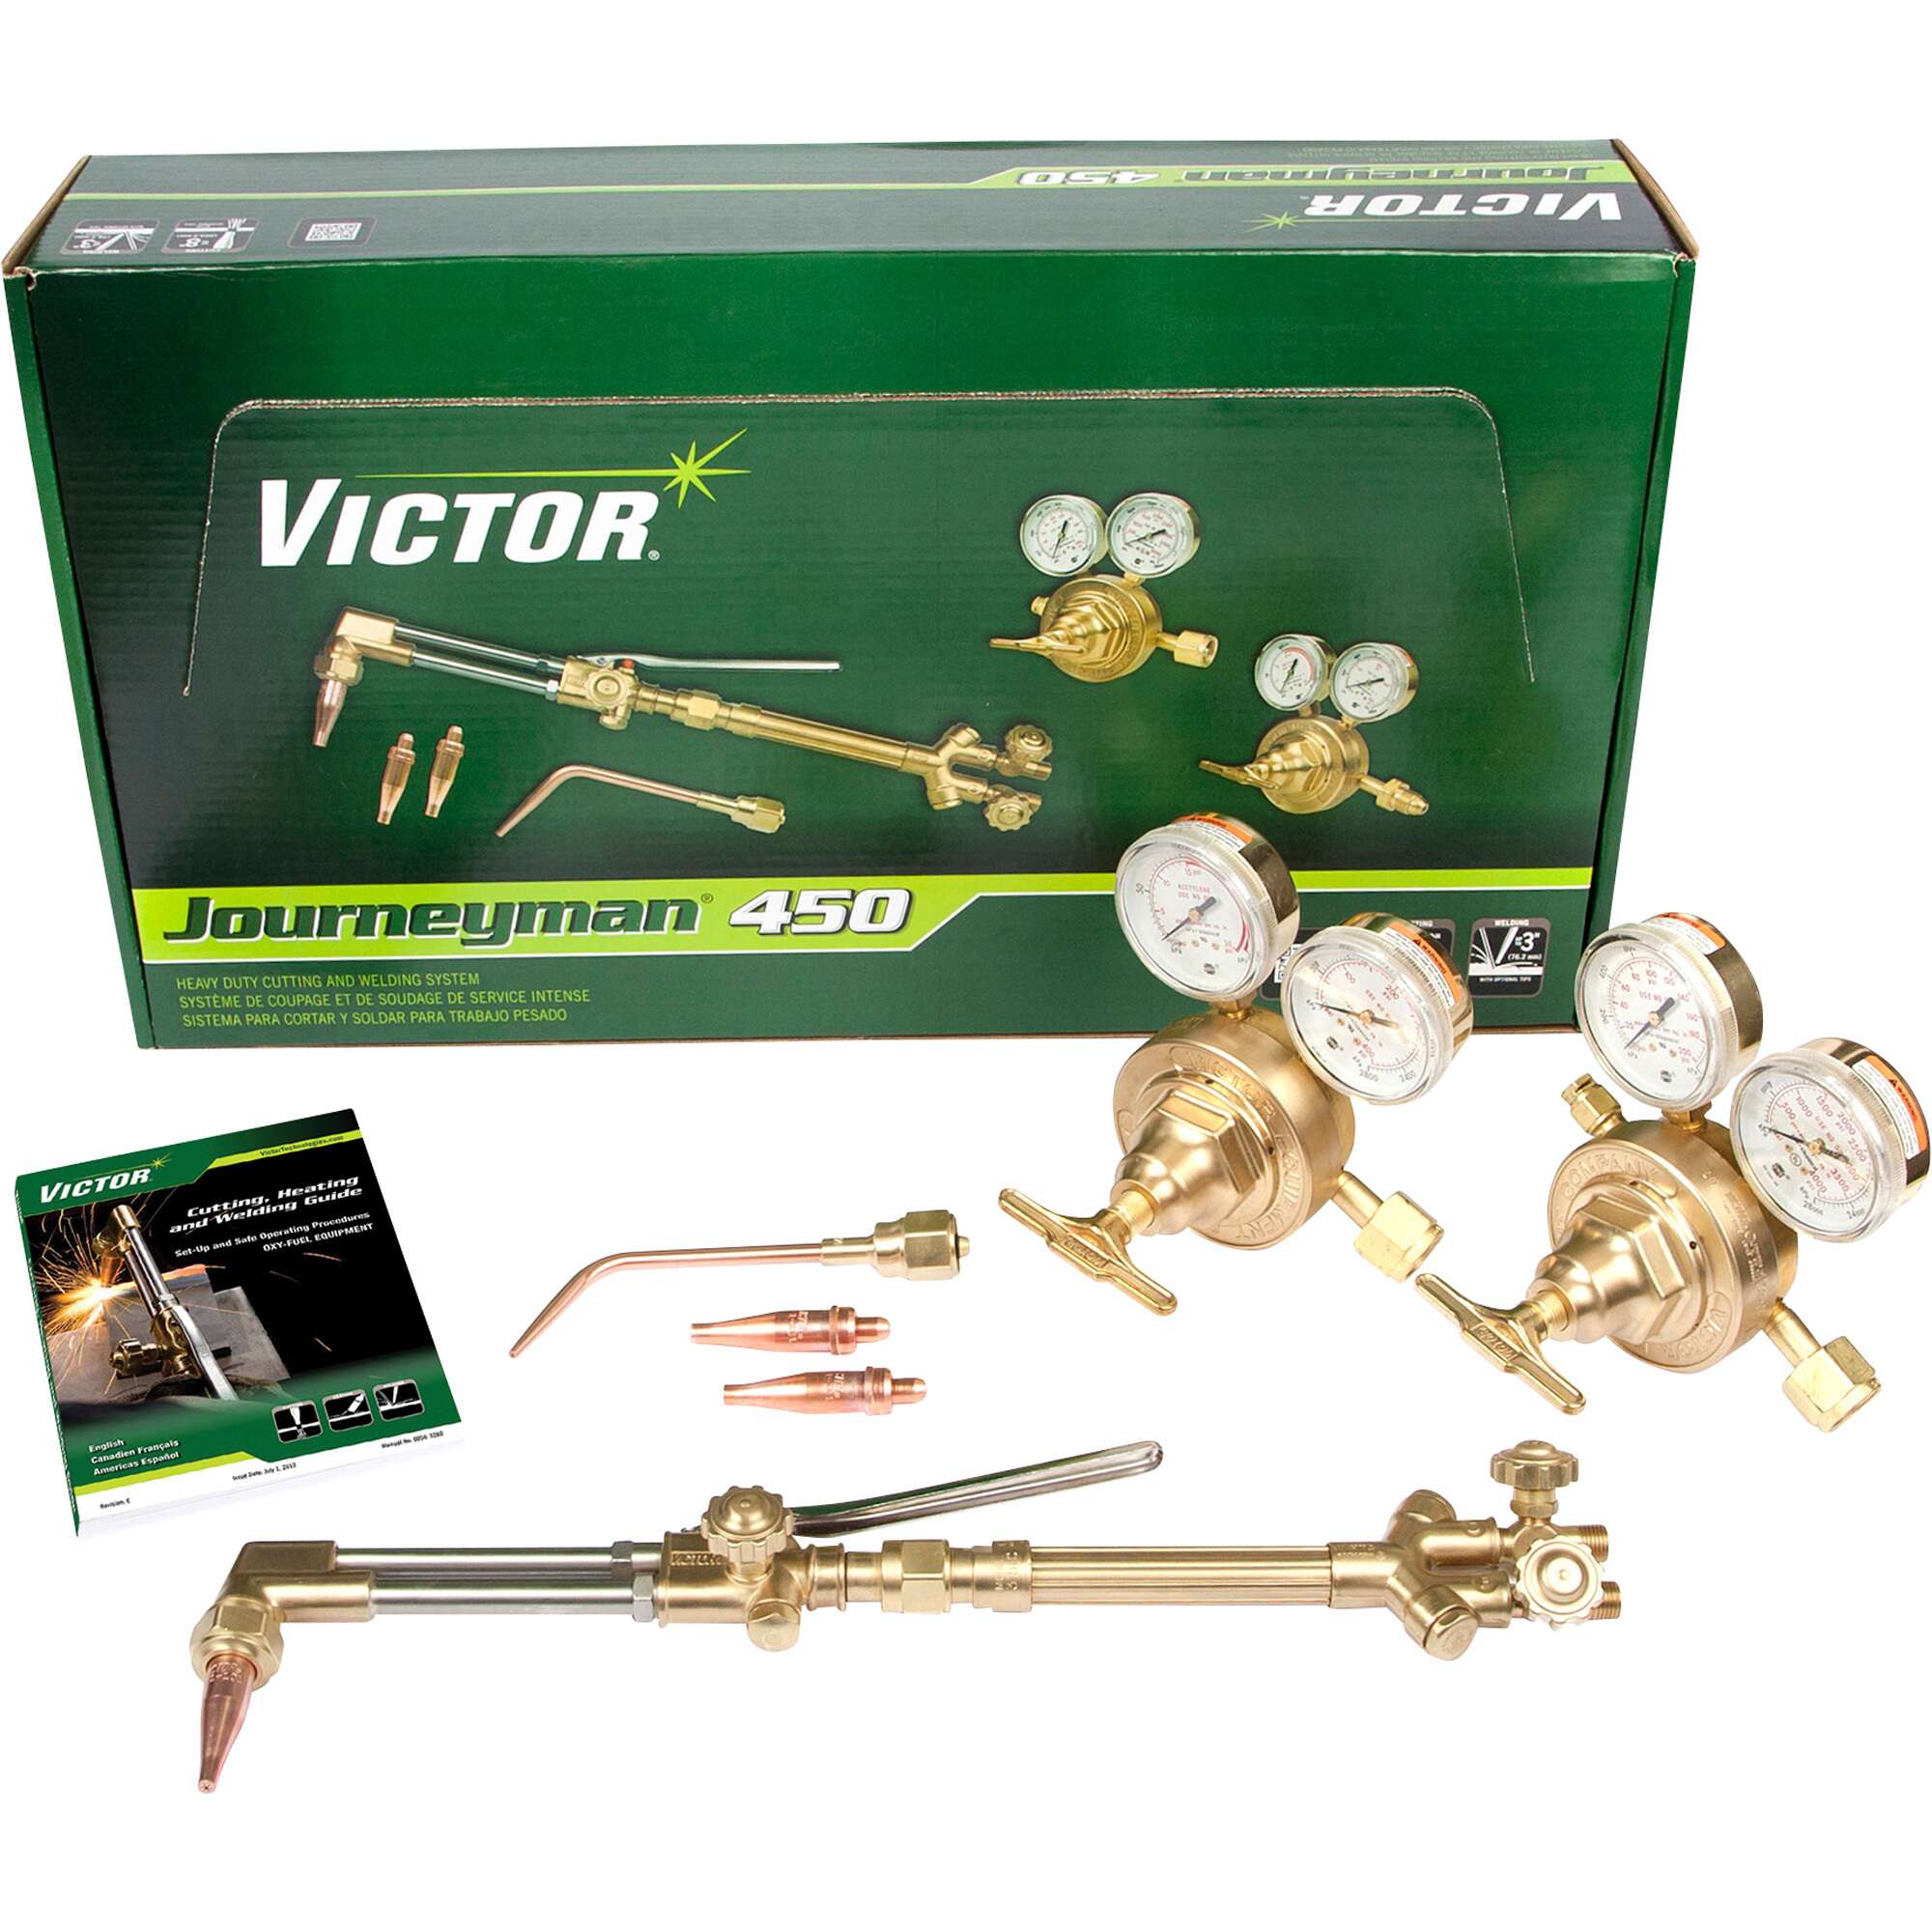 Victor Journeyman 450 Cutting and Welding System